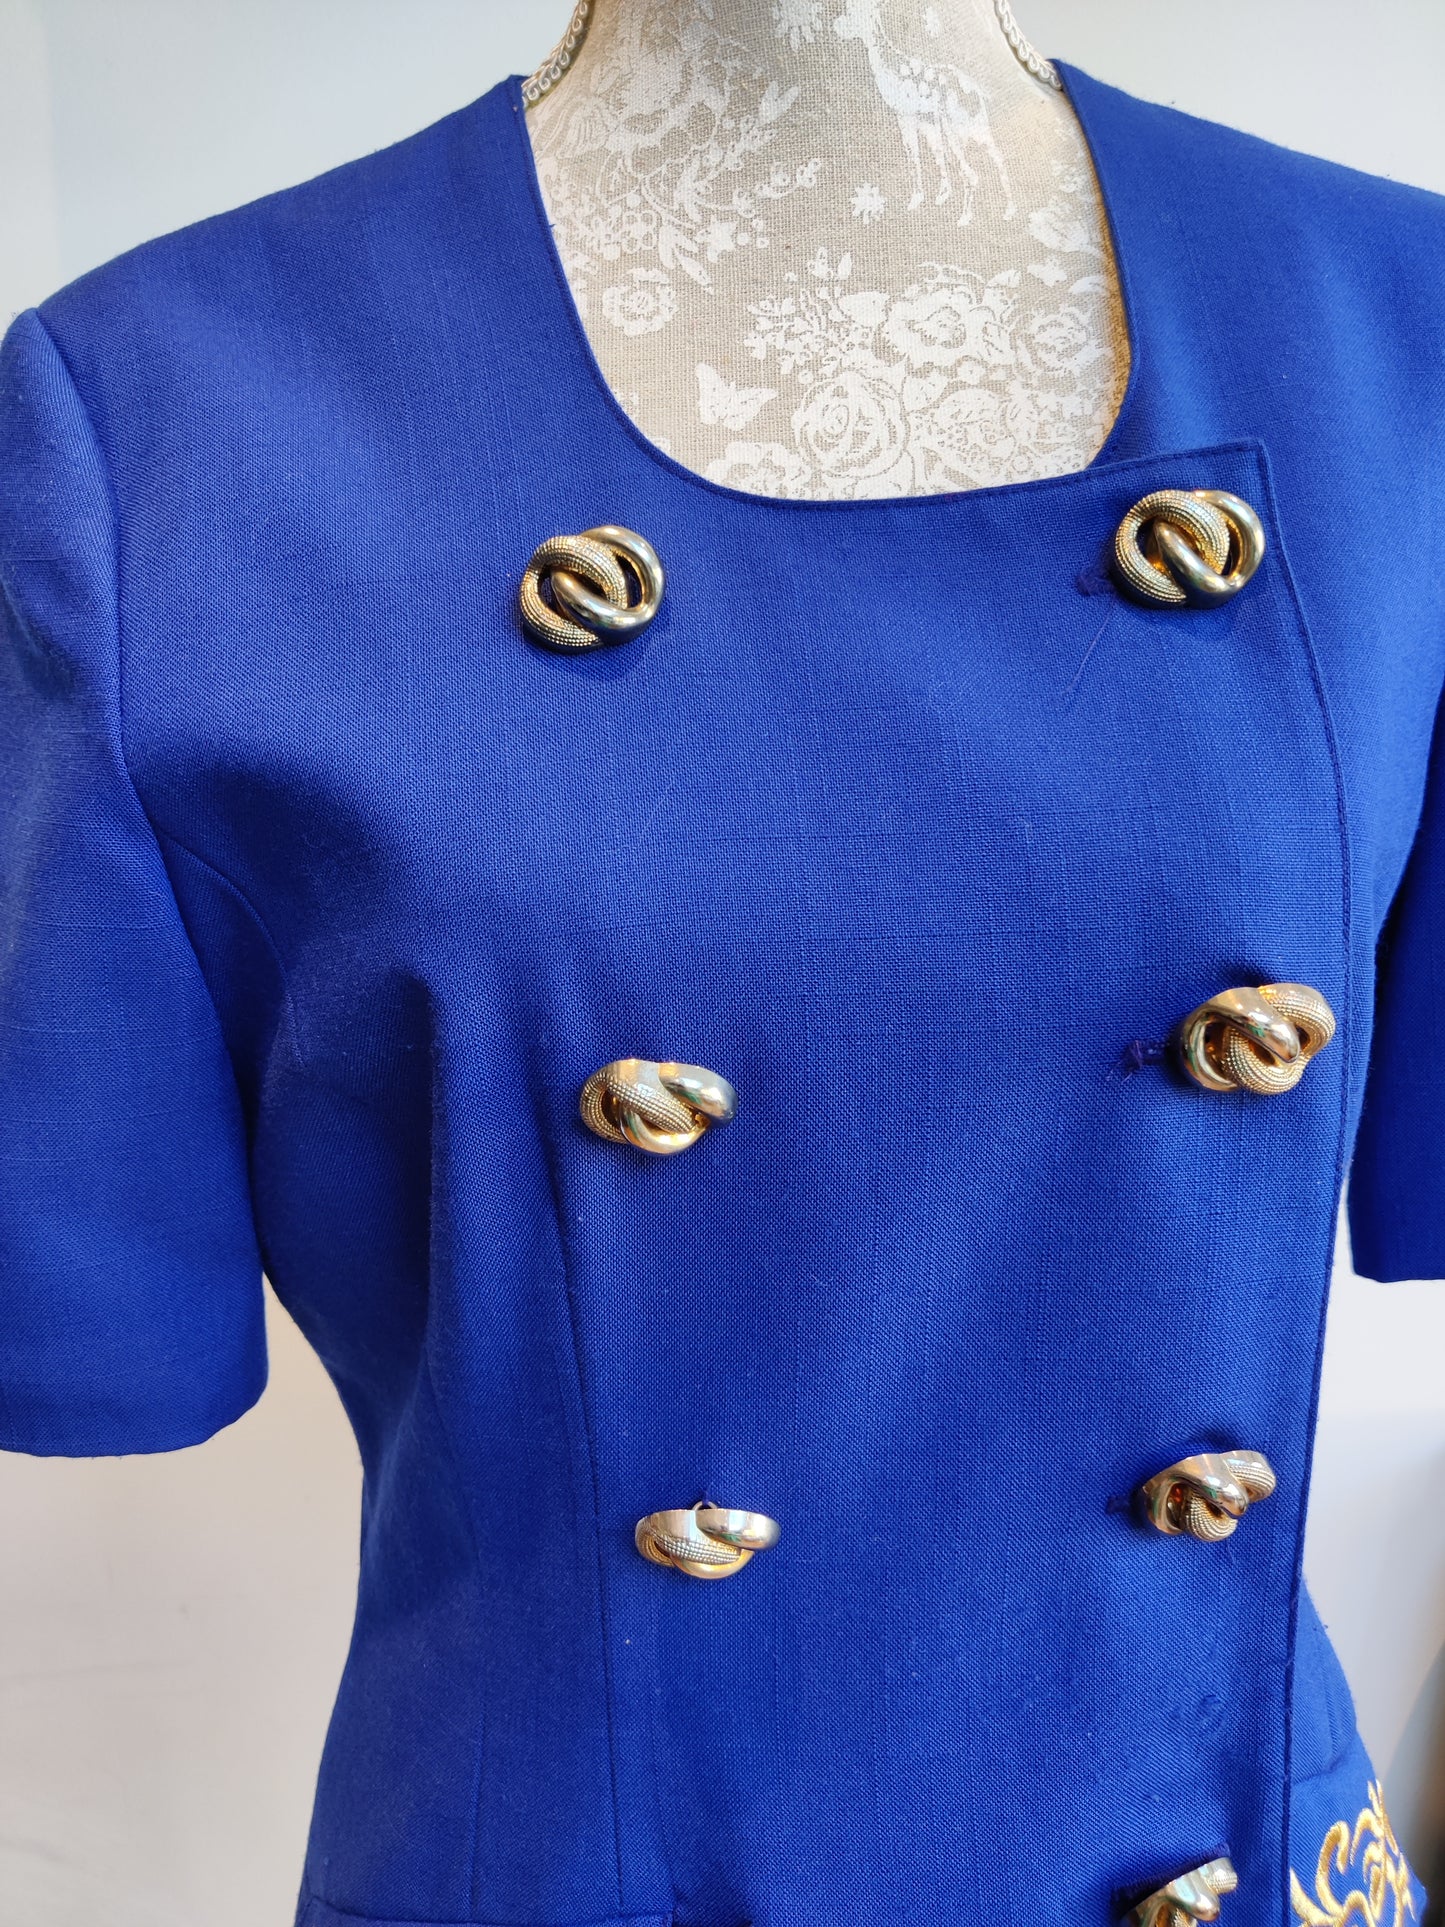 Vintage jacket in blue and gold. 